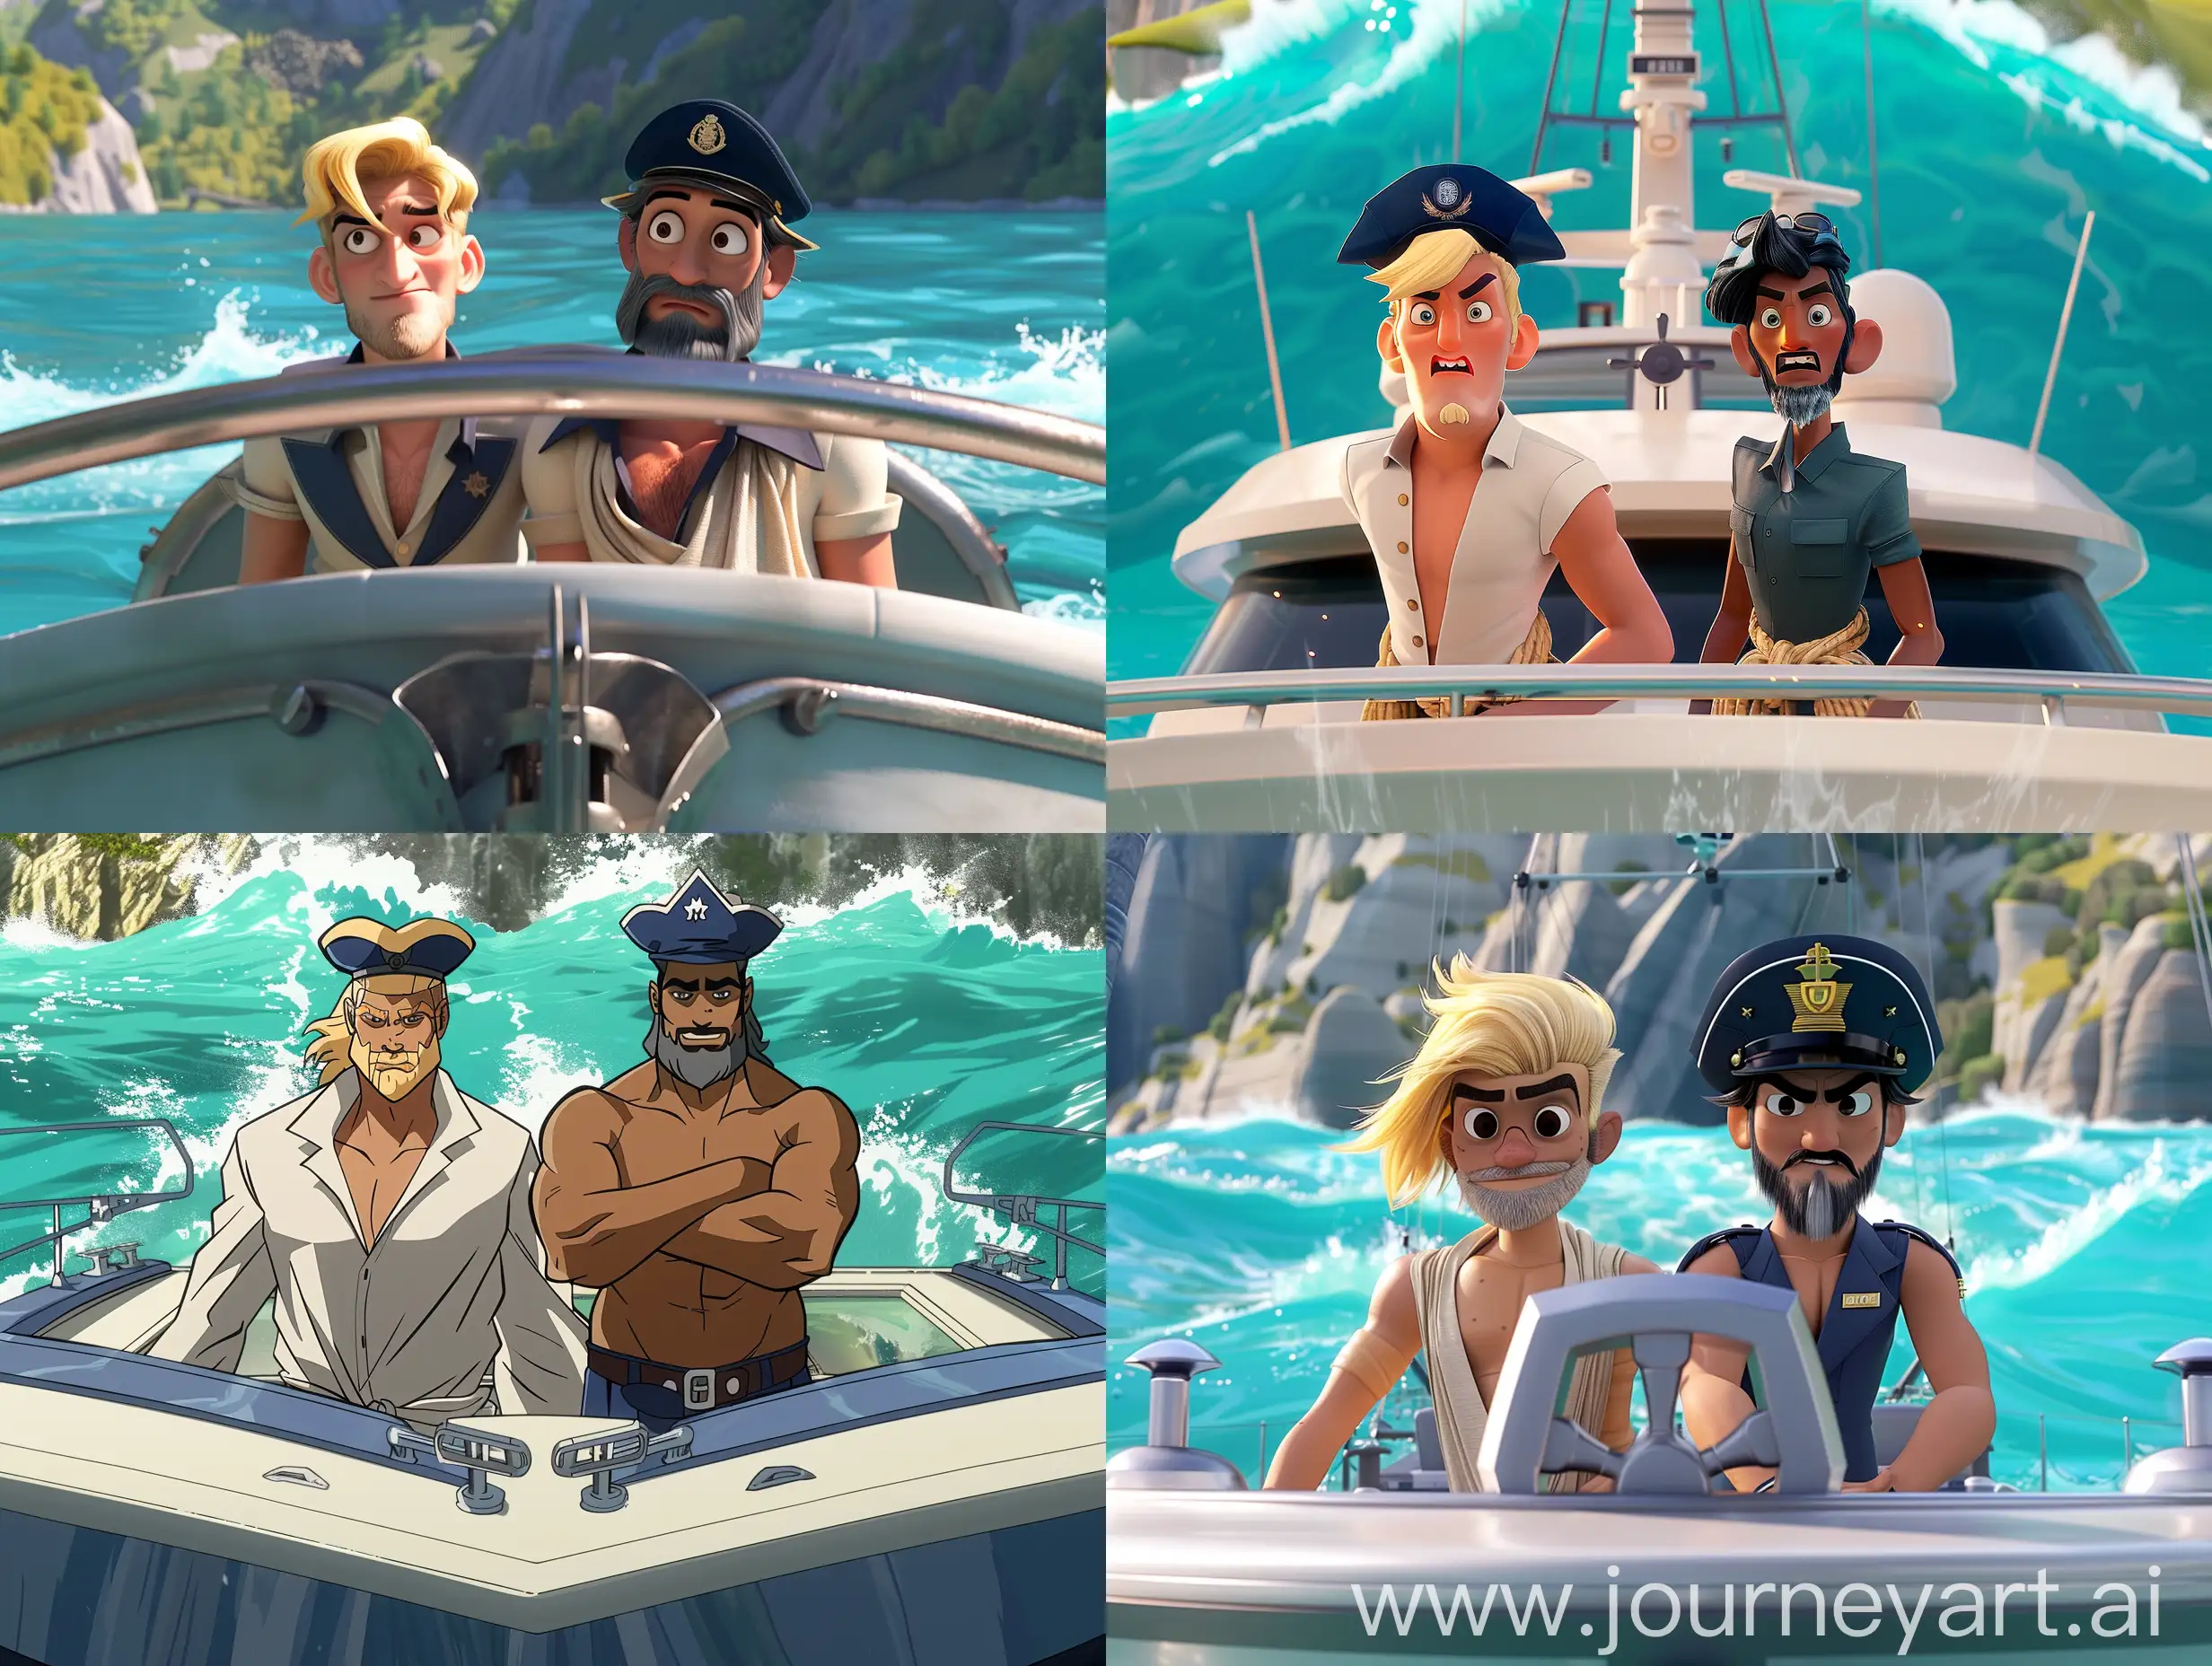 two animated men standing at the front of a large yacht. One has blonde hair, the other has black hair and a grey beard. They are wearing navy captains hats and loose flowing beachwear. The boat is in a lake of brilliant turquoise water with waves crashing behind.